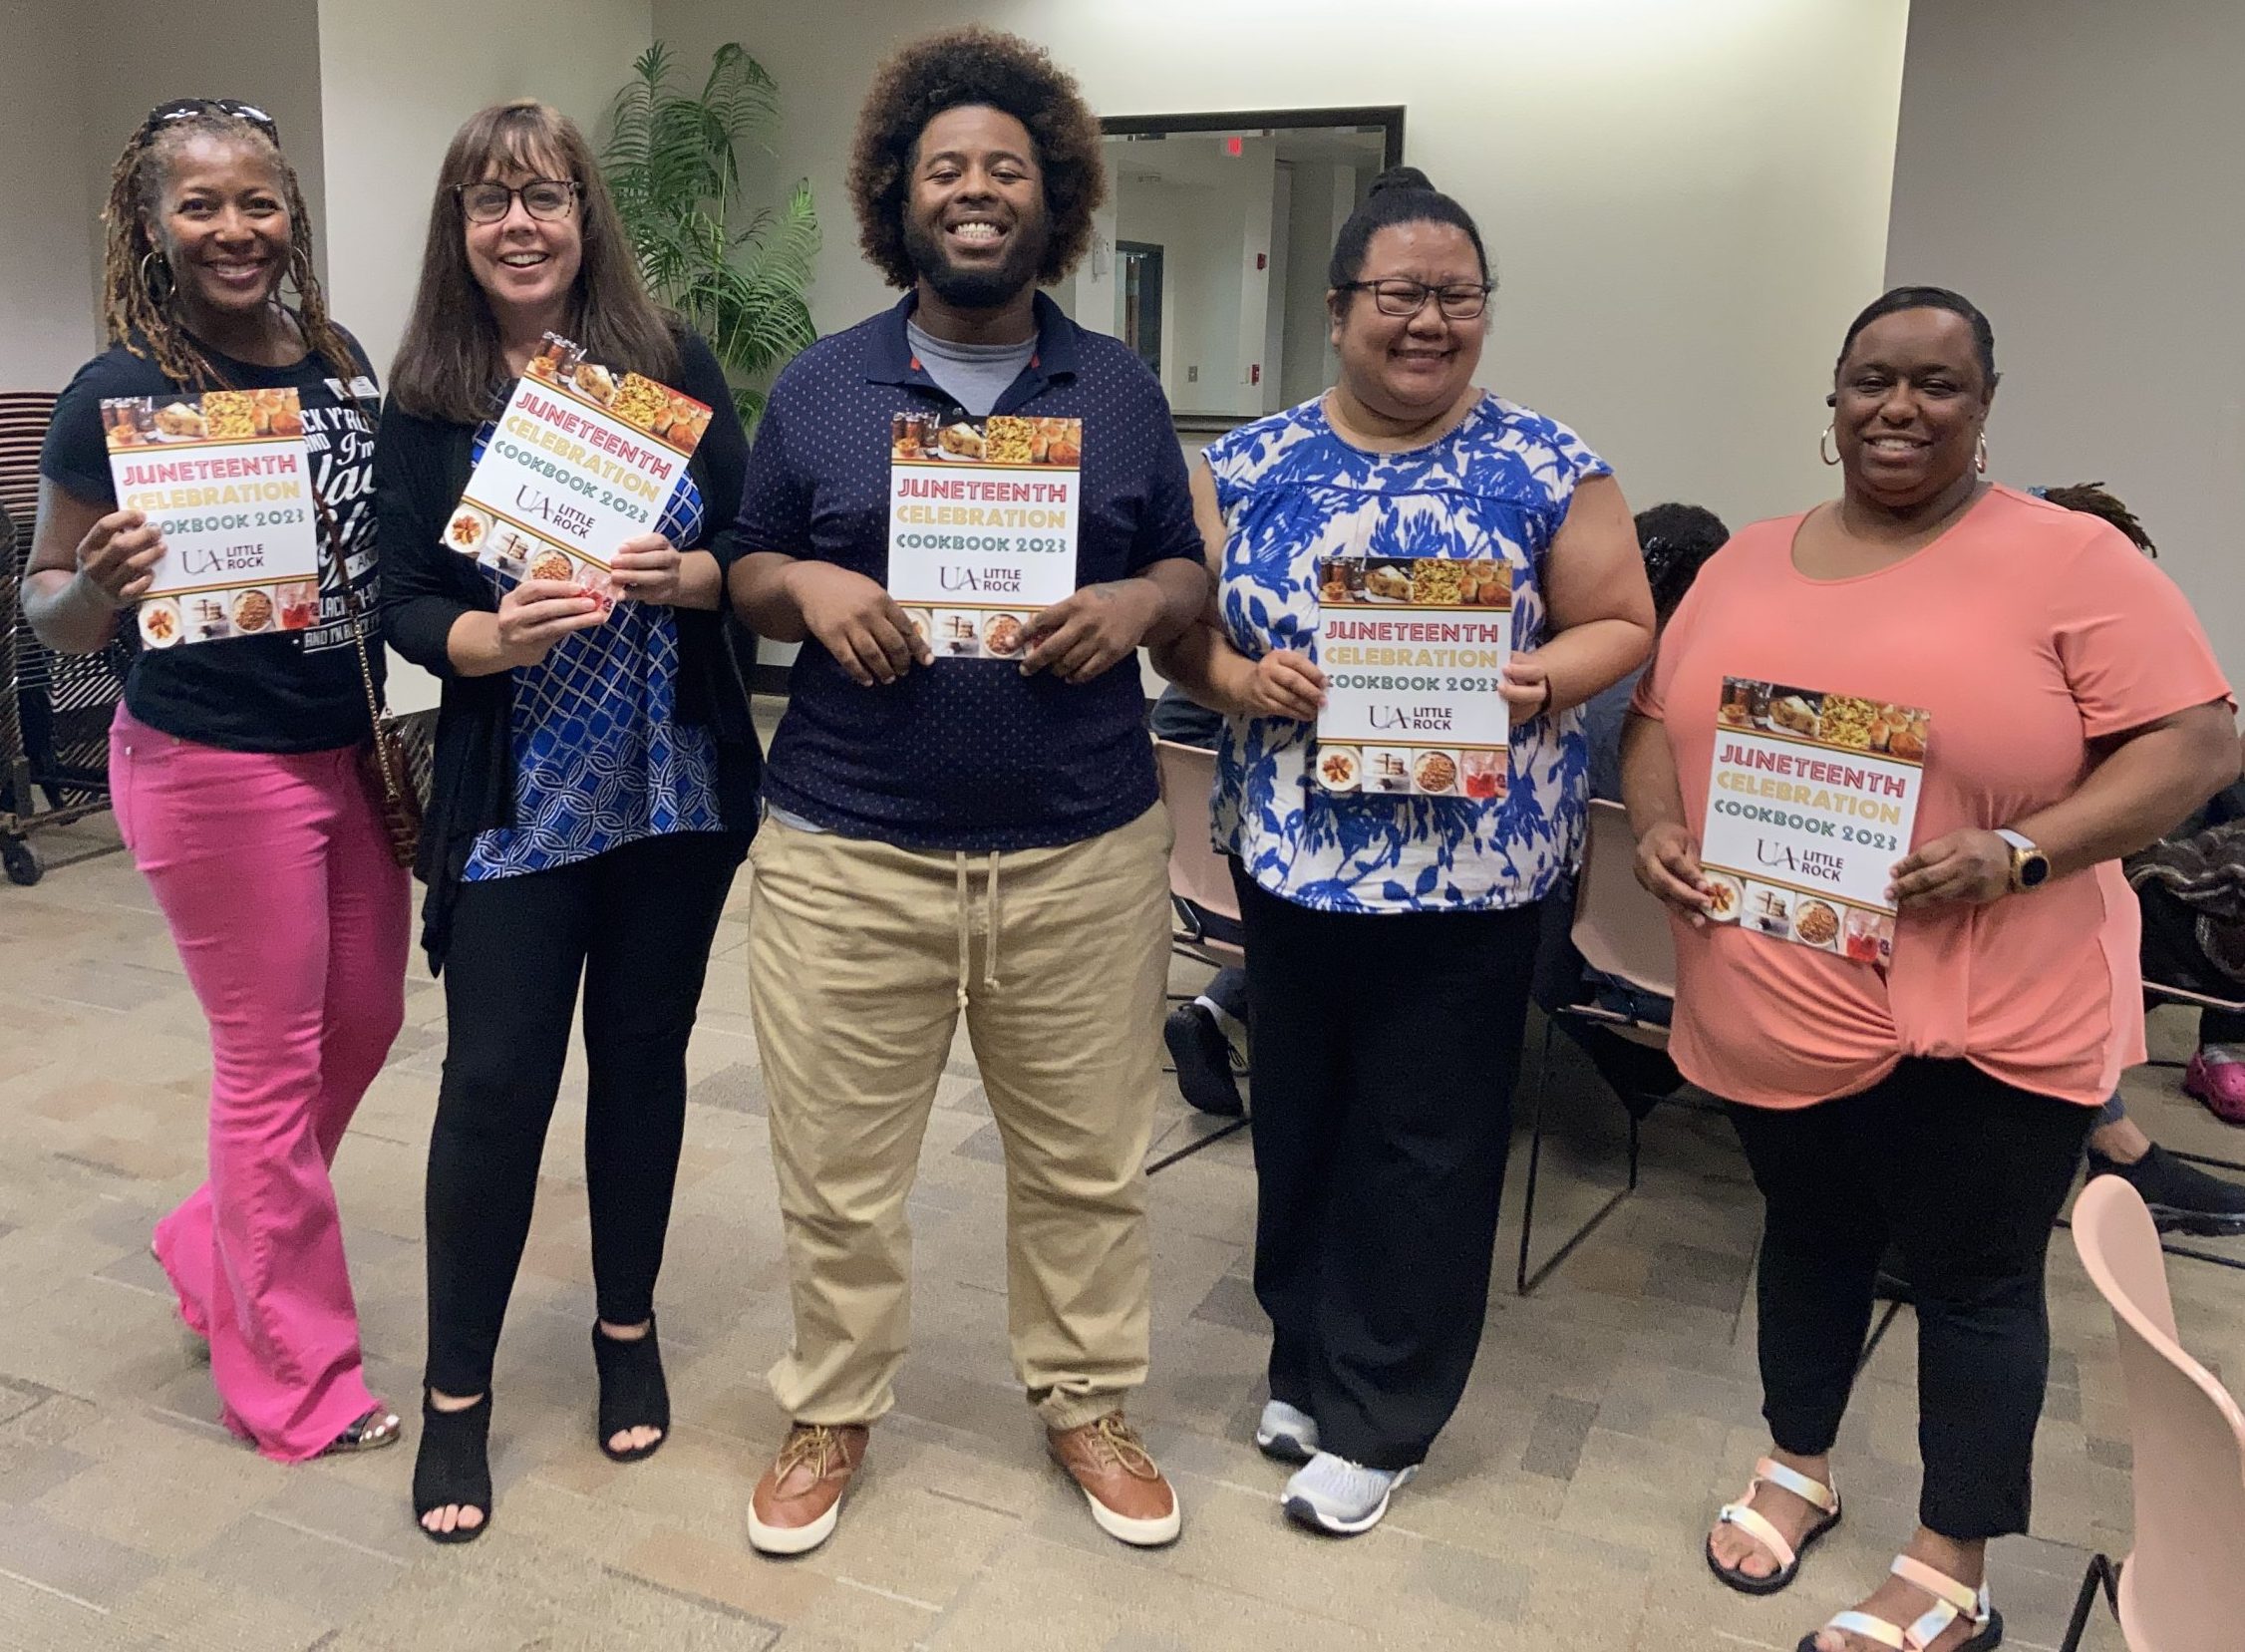 These UA Little Rock employees and community members won copies of the cookbook during the university's Juneteenth Celebration.